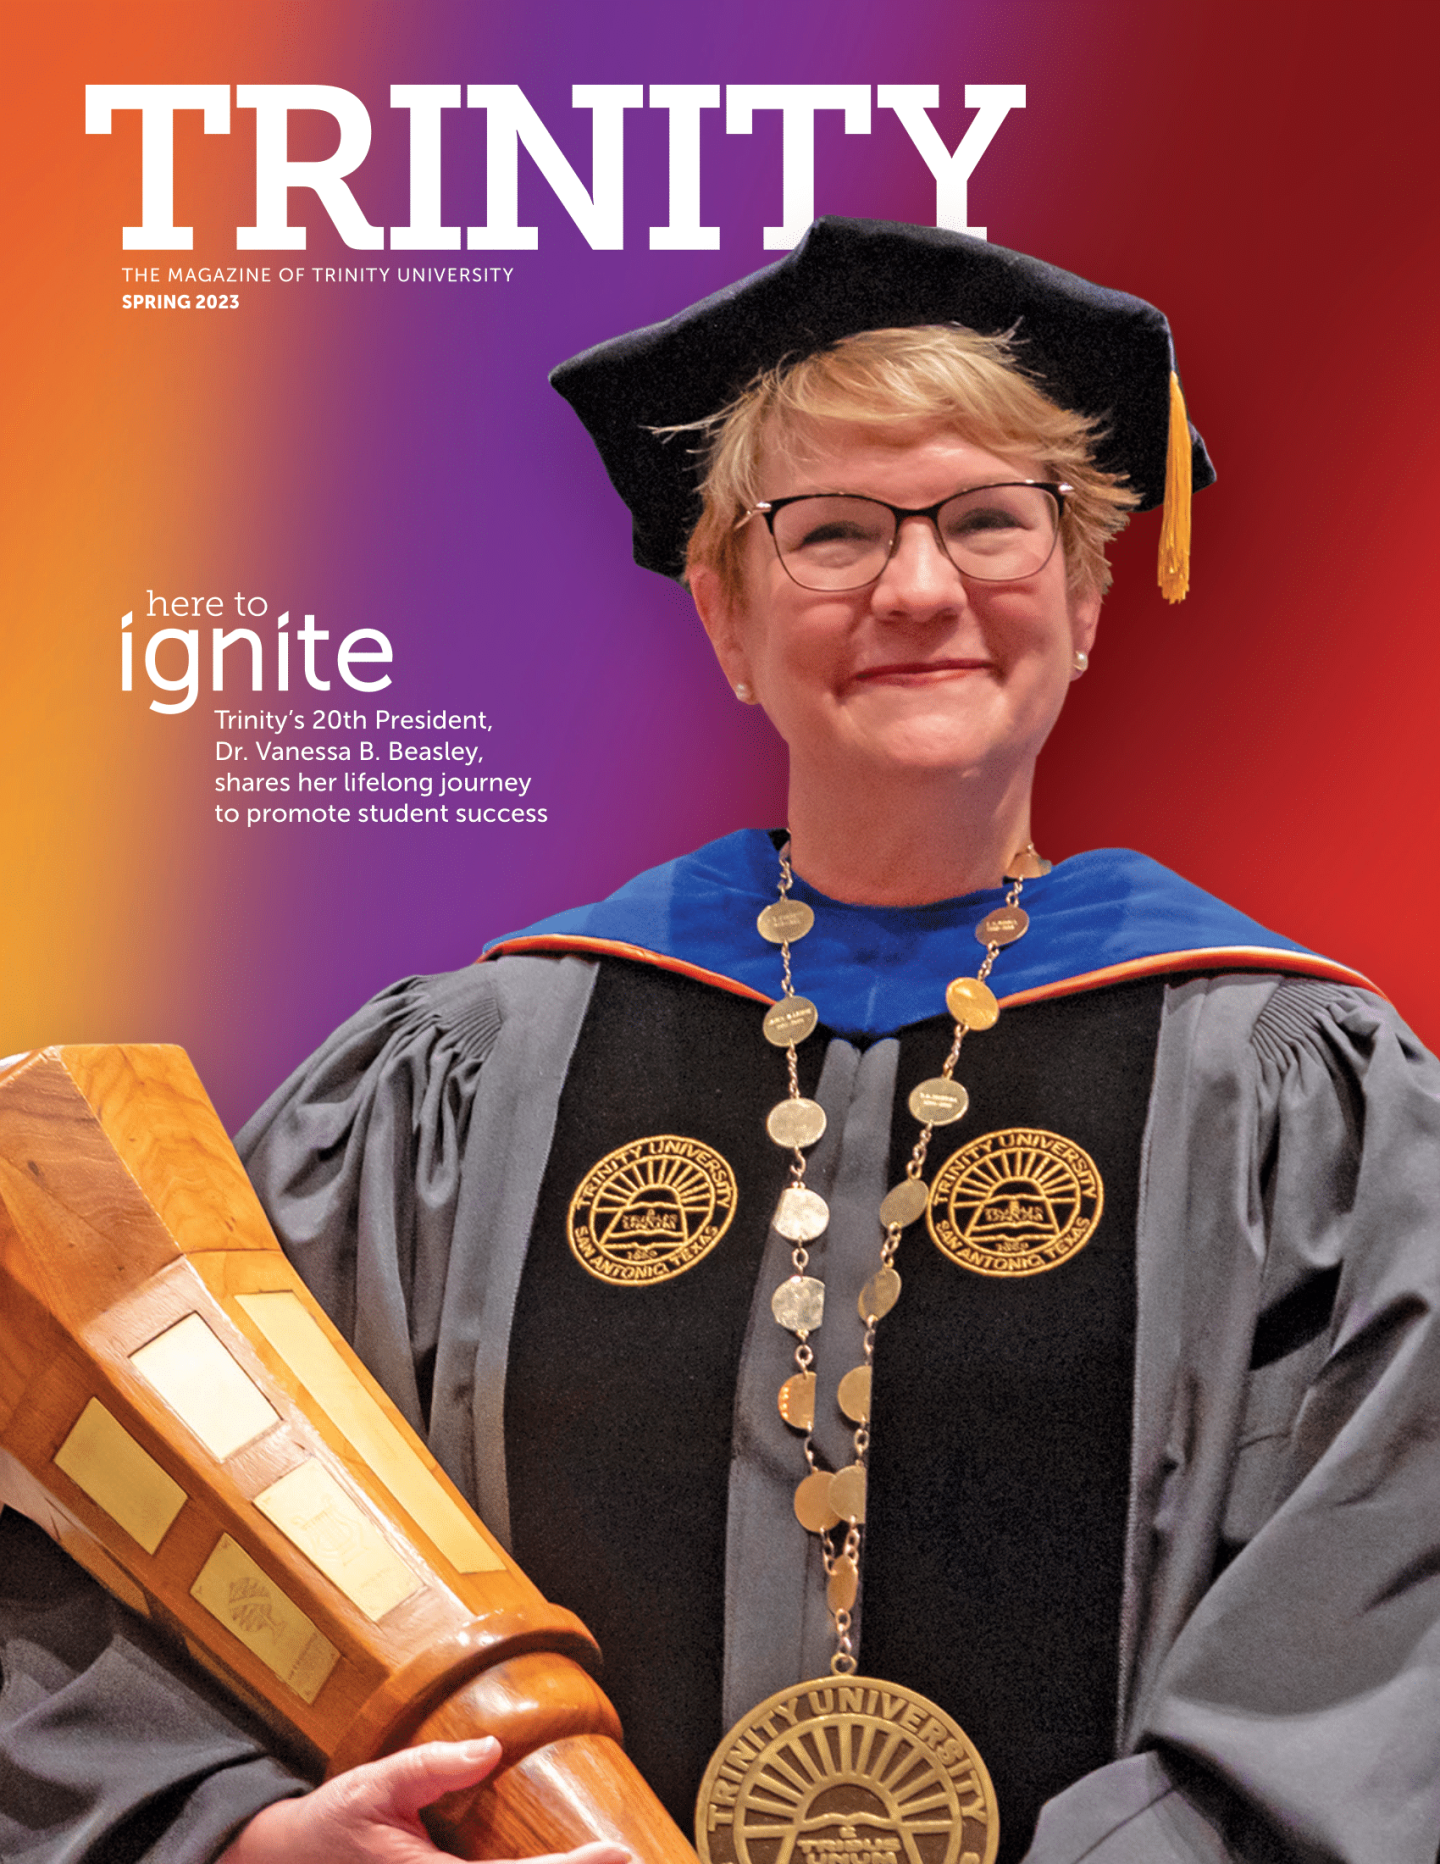 the cover of Trinity magazine Spring 2023; A portrait of Vanessa Beasley holding the presidential mace in full regalia in front of a colorful gradient